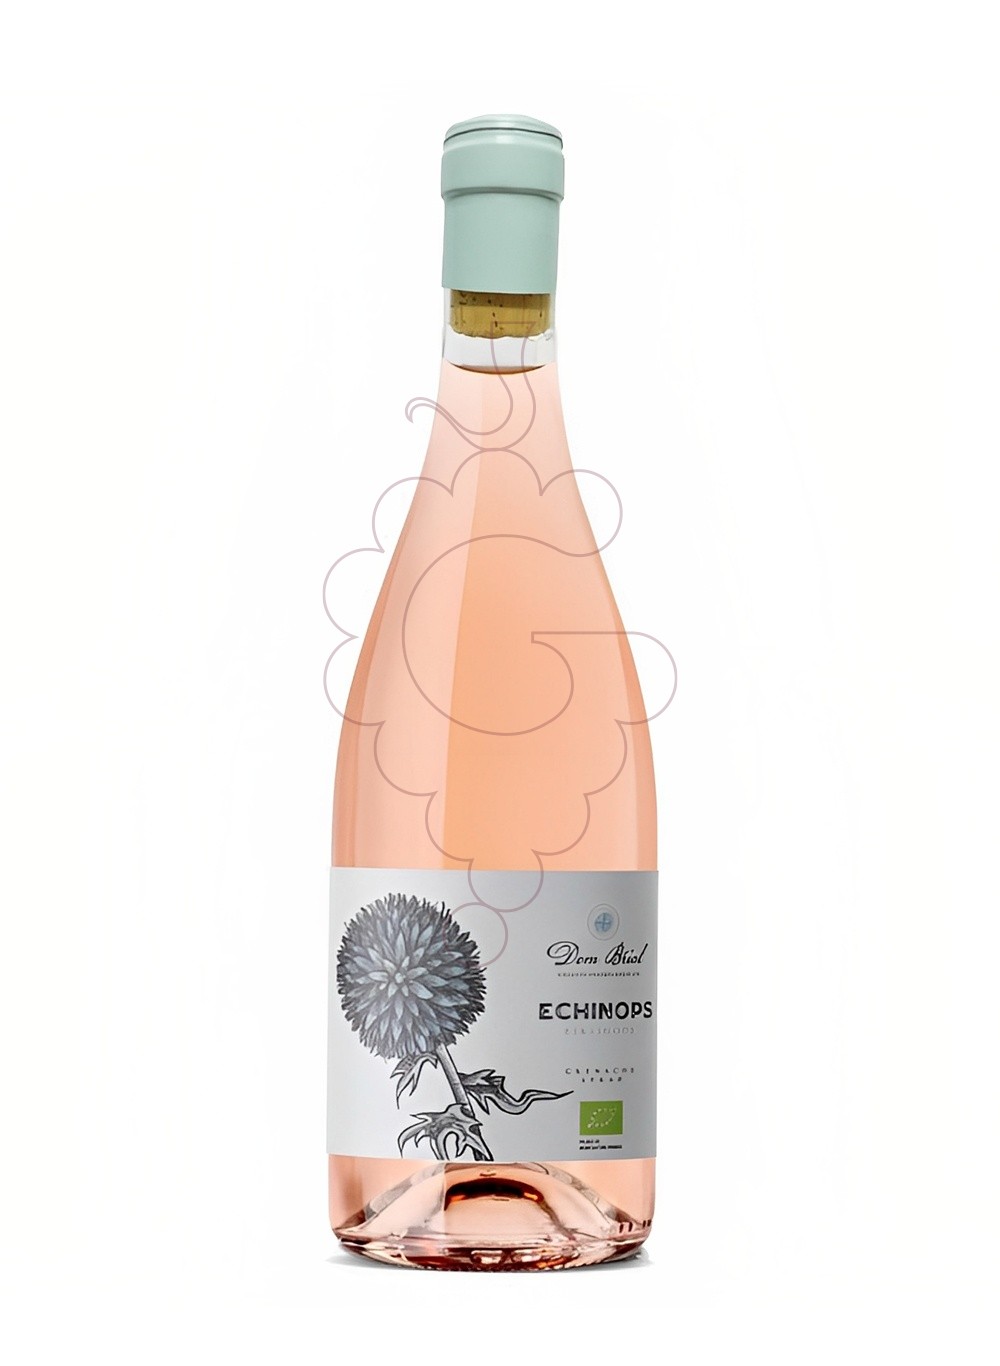 Photo Echinops dom brial rose 75 cl vin rosé